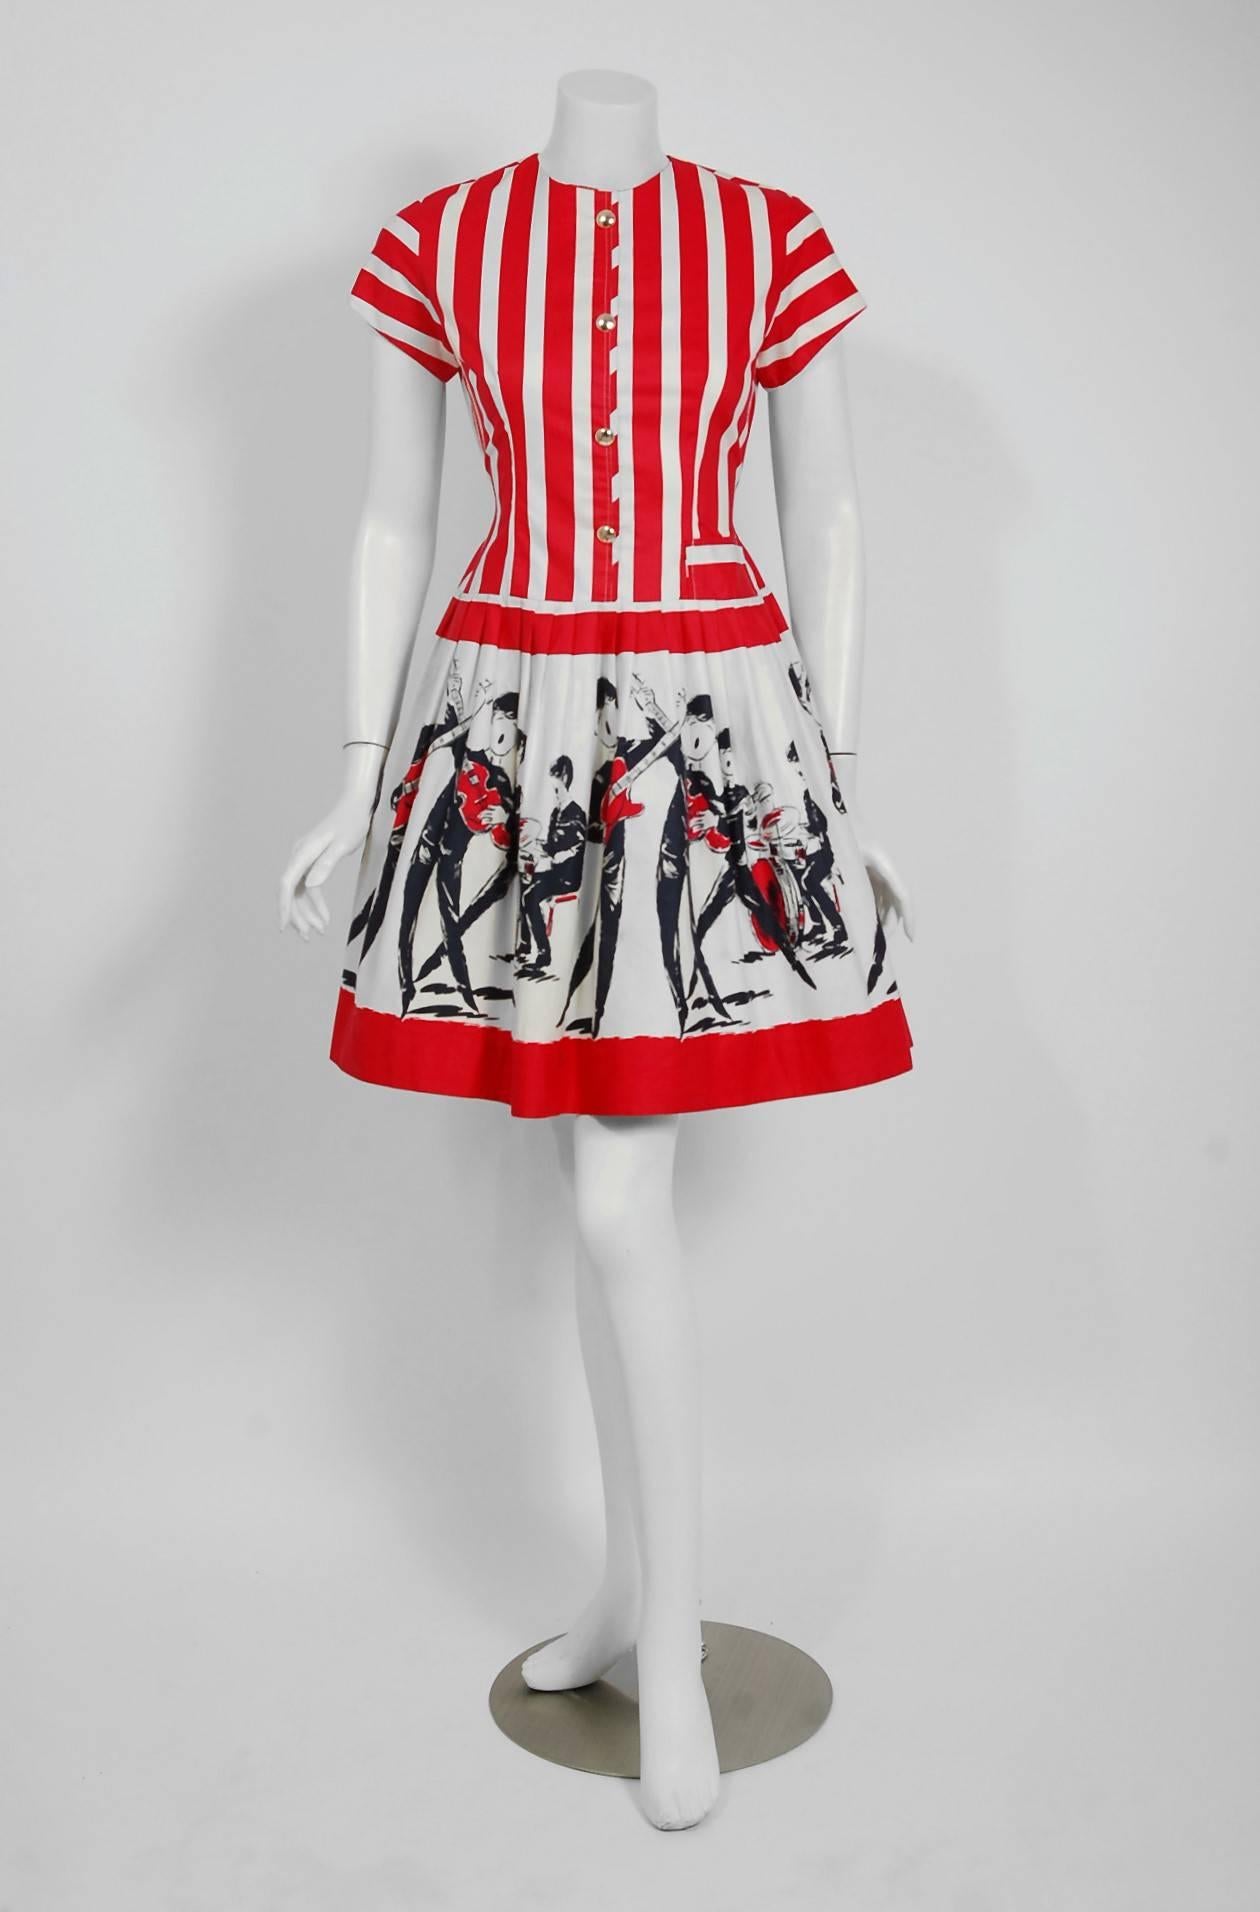 This ultra-rare Beatles memorabilia dress, dating back to 1965, is the perfect addition to any Fab Four collection! With its vivid artistic impression of the group performing and flawless styling, this garment has the casual playfulness the 1960's